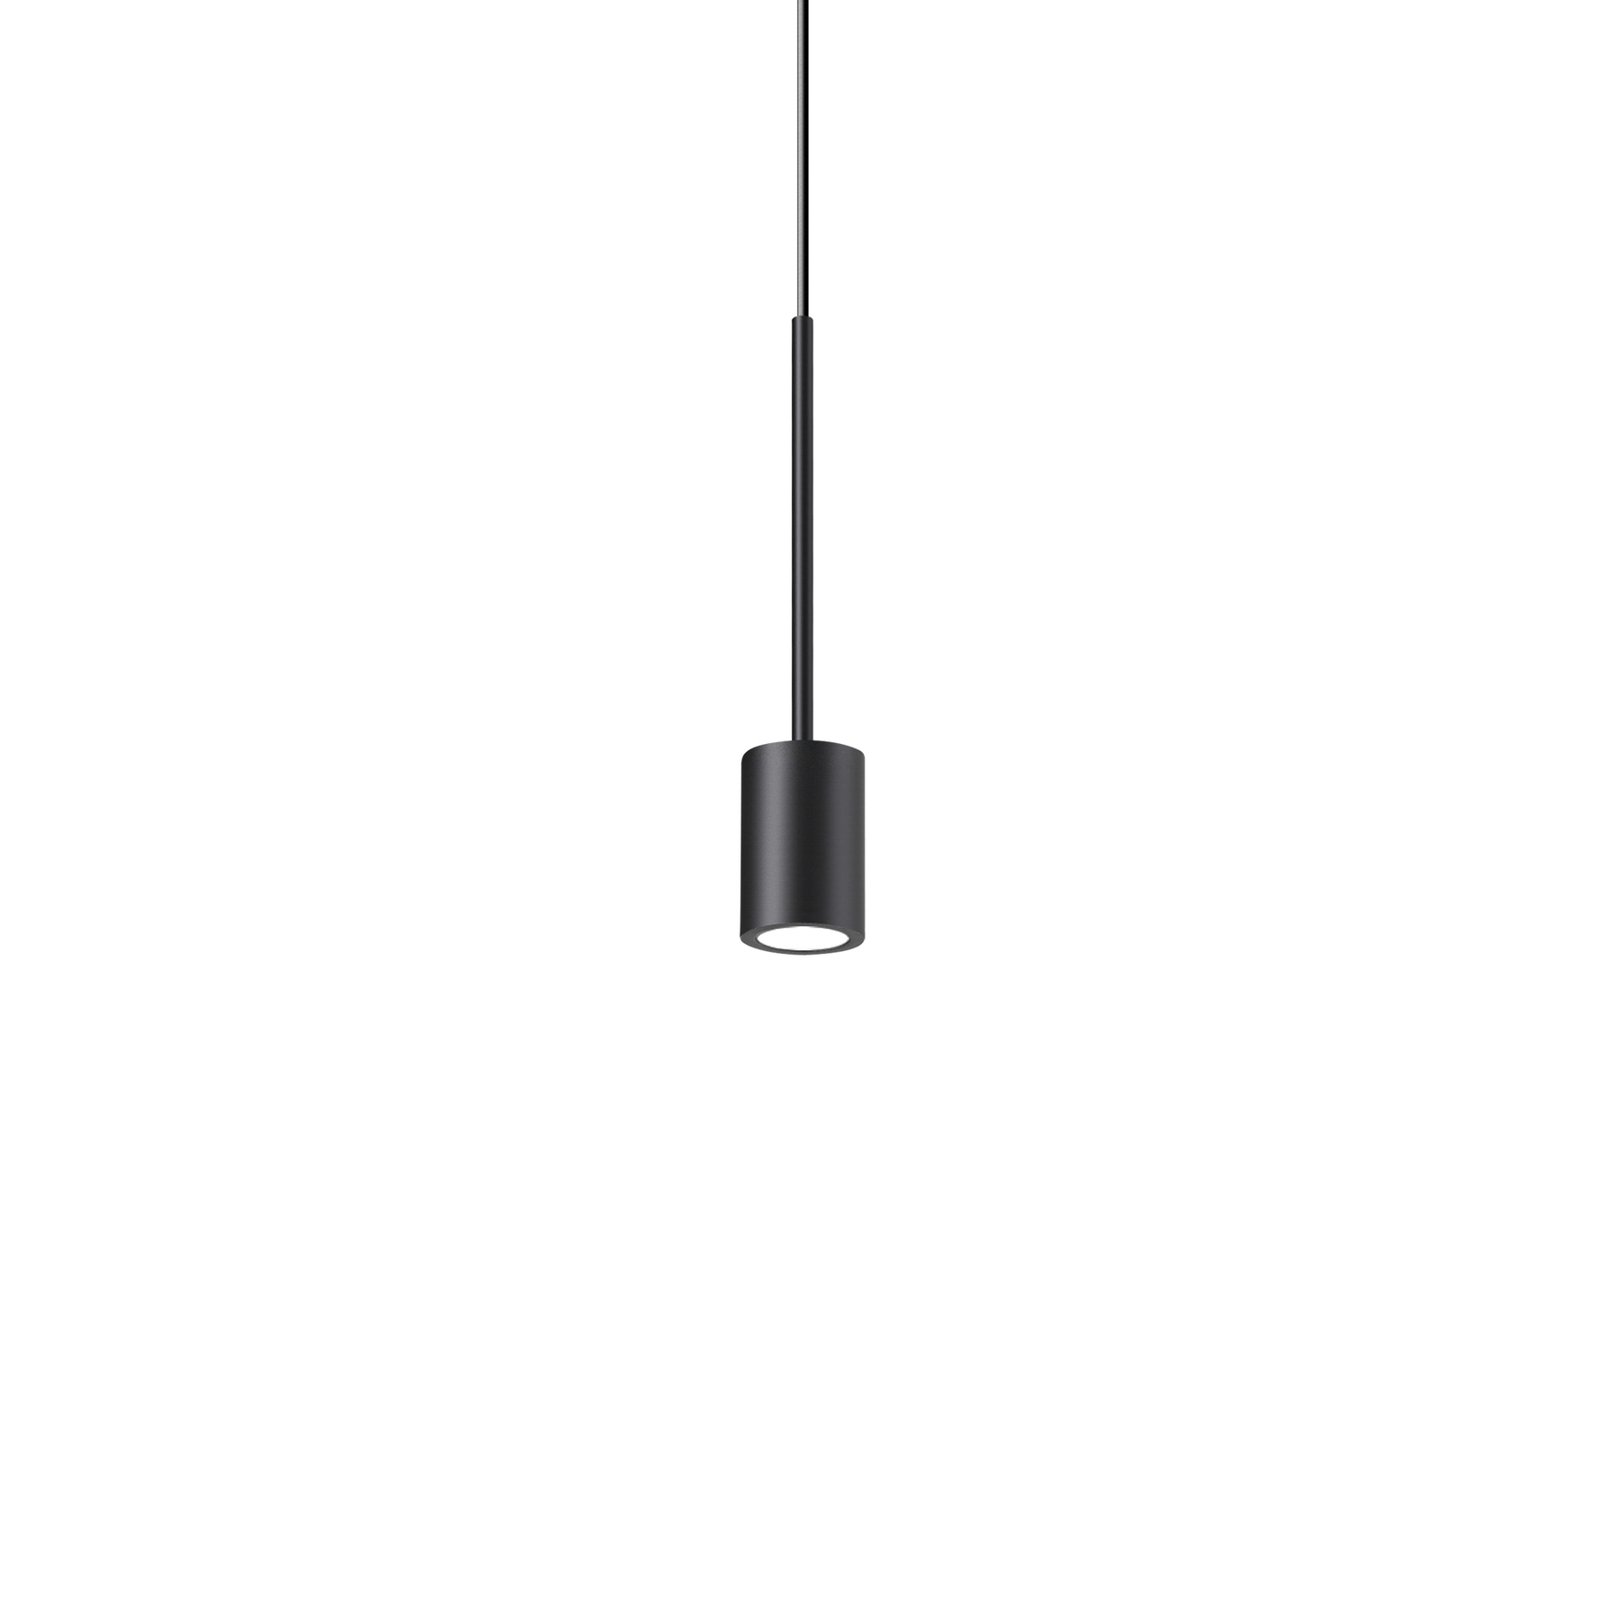 Candeeiro suspenso LED Ideal Lux Archimede Cilindro metal preto